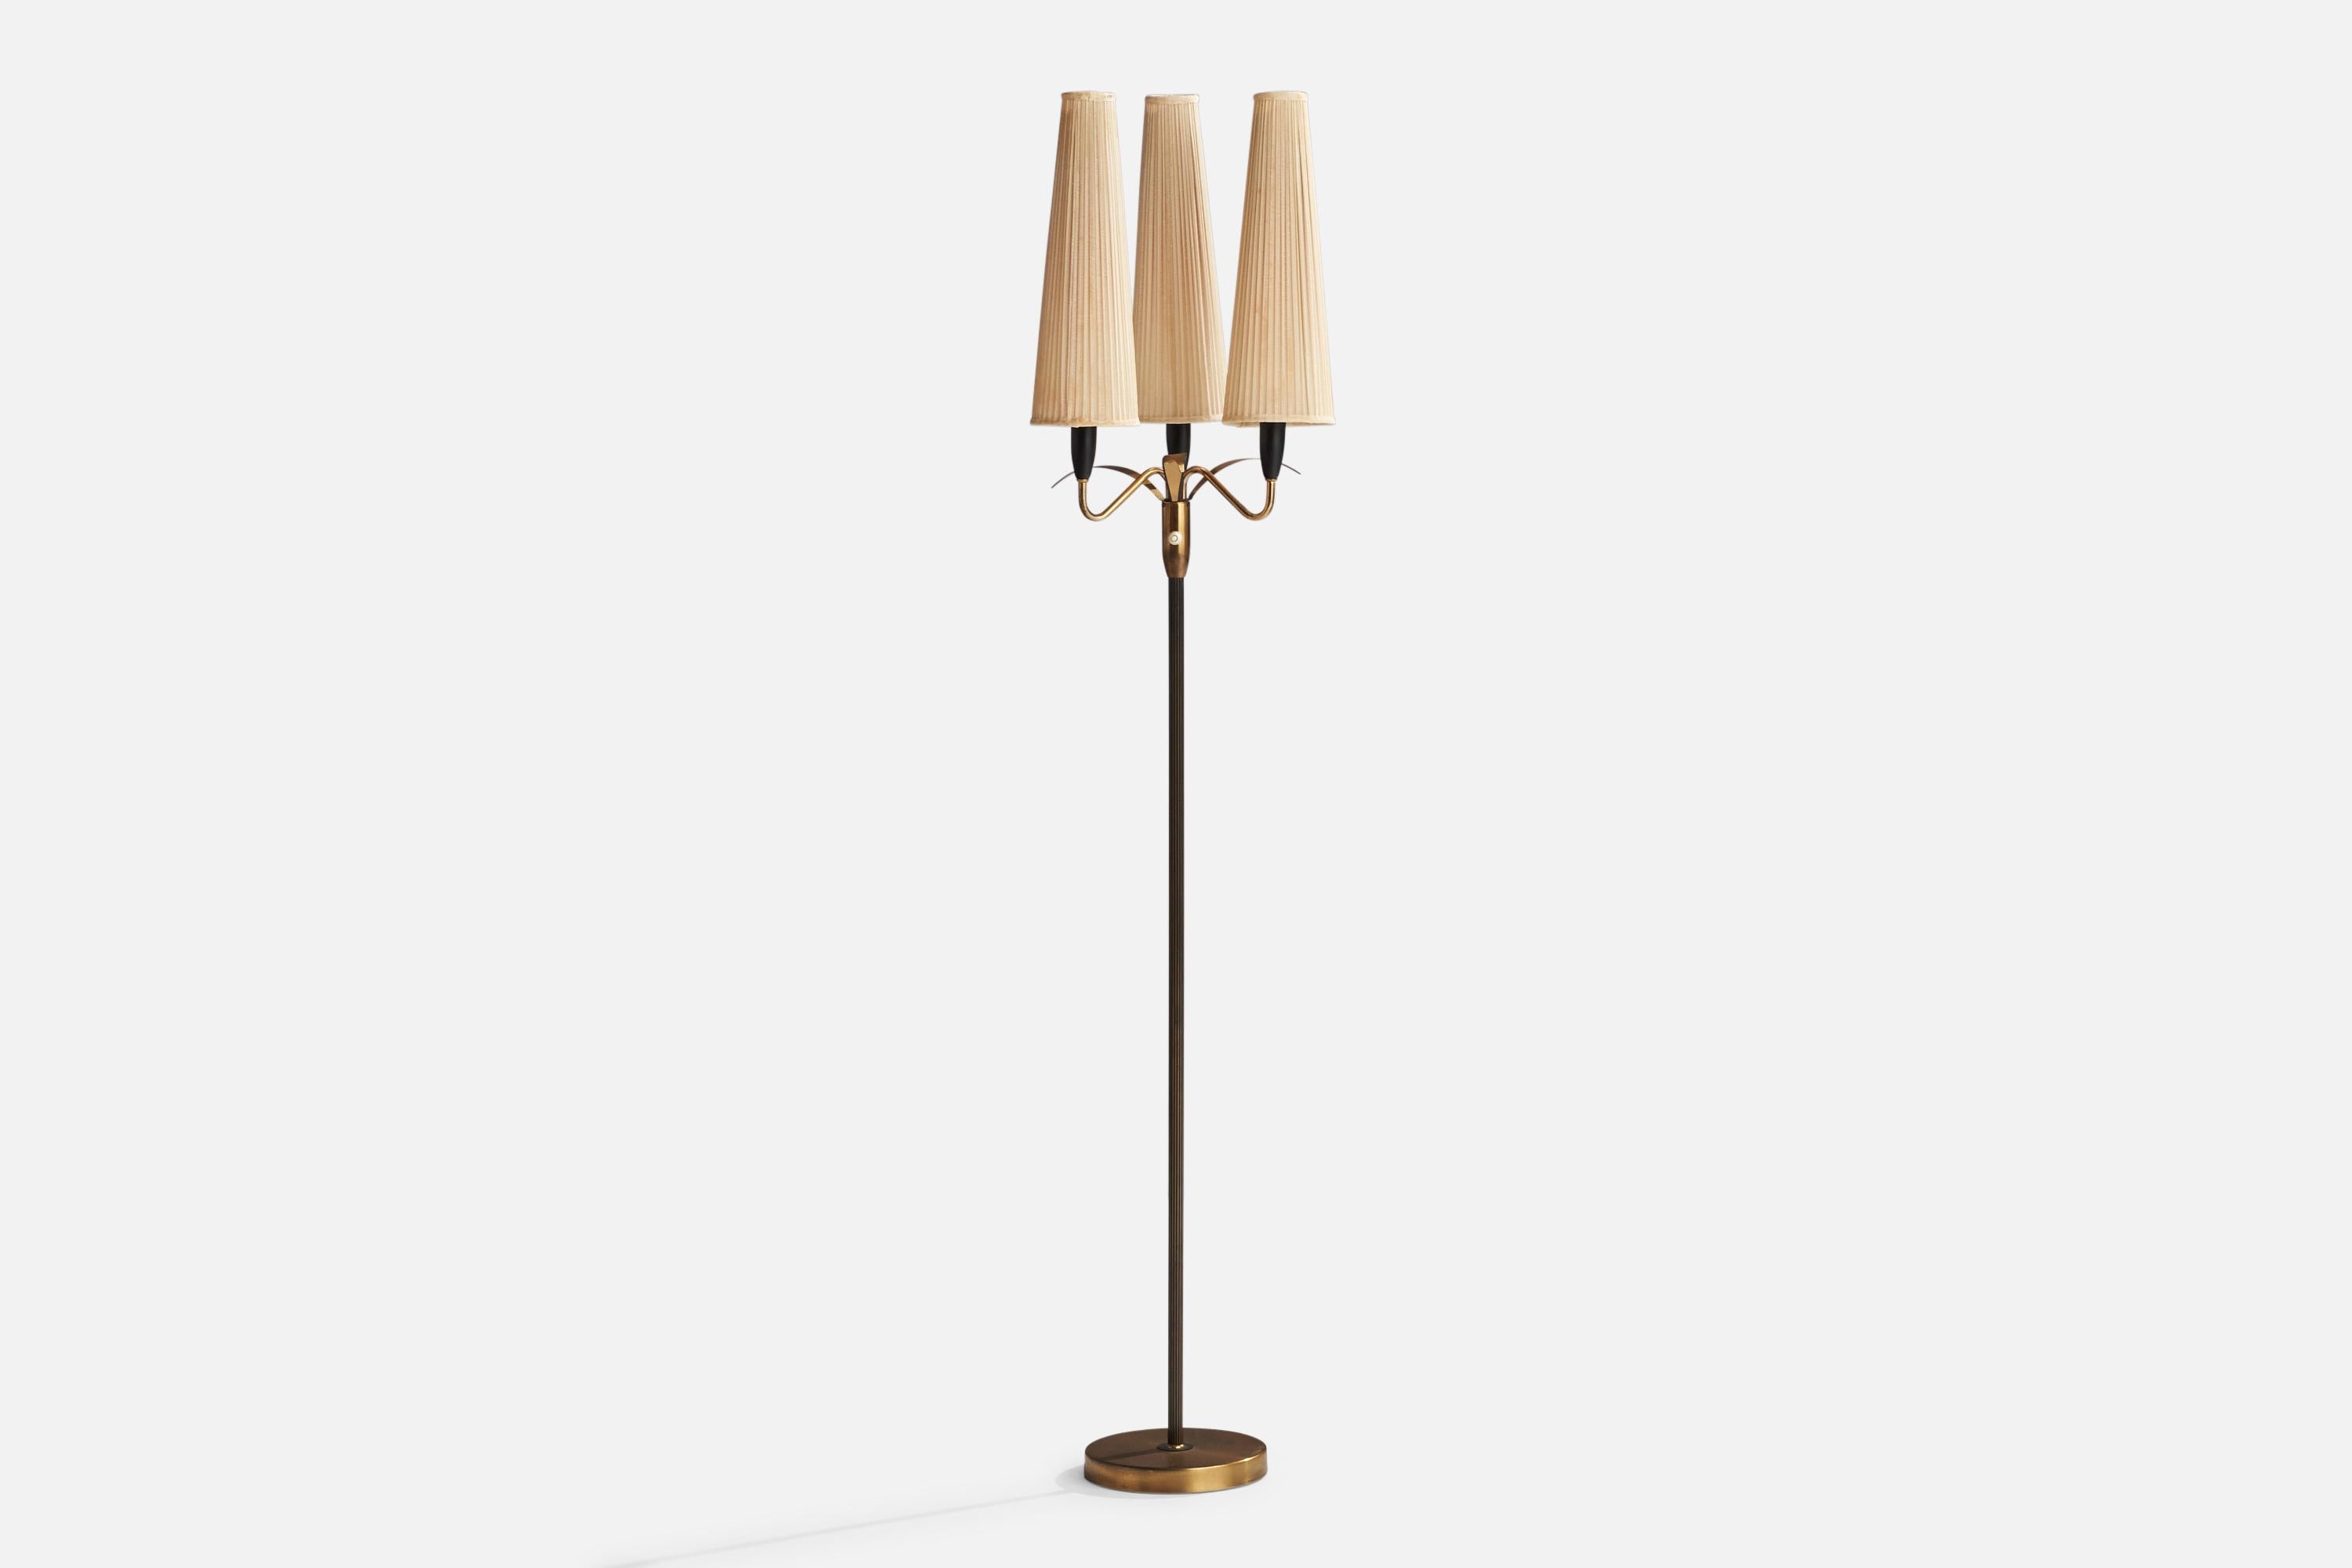 A three-armed brass, black-lacquered metal and beige fabric floor lamp designed and produced in Sweden, 1950s.

Overall Dimensions (inches): 67” H x 13.5”  W x 14” D
Stated dimensions include shade.
Bulb Specifications: E-14 Bulb
Number of Sockets: